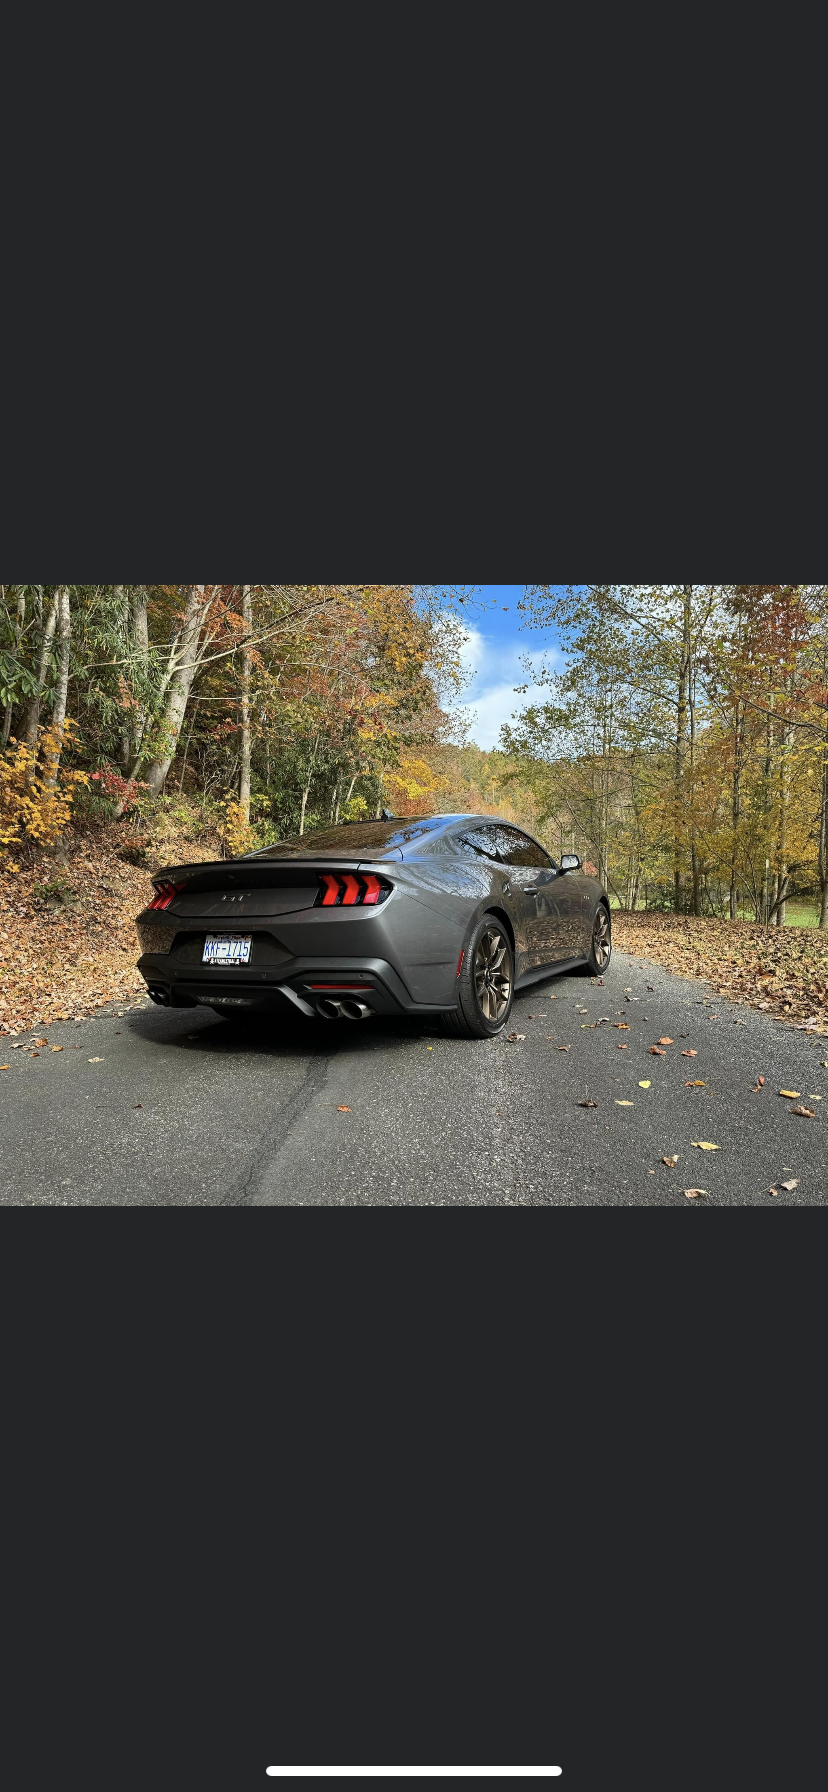 S650 Mustang Official CARBONIZED GRAY Mustang S650 Thread IMG-1345.PNG